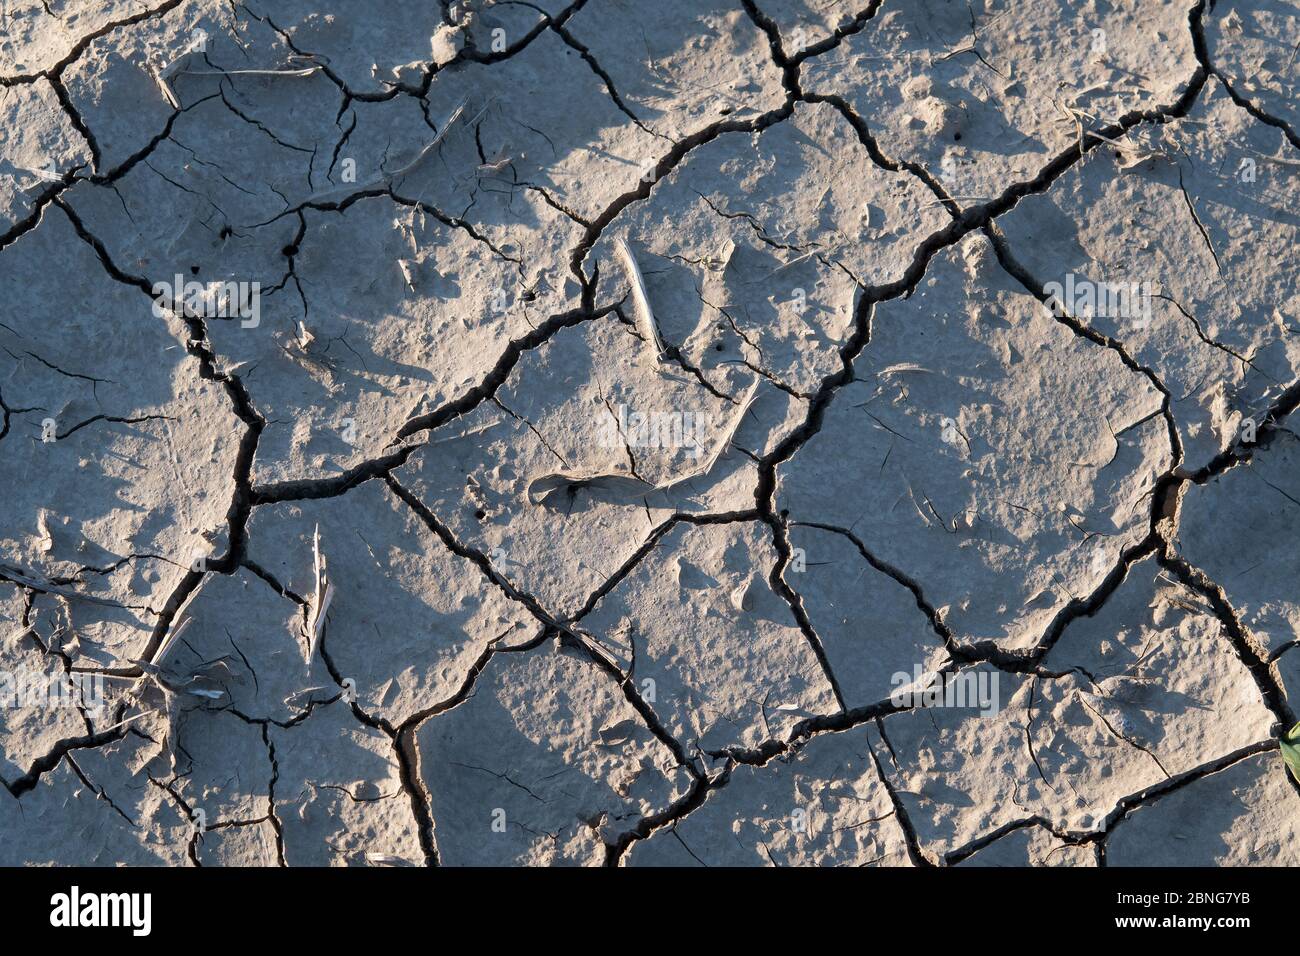 Cracked dry brown earth soil desert landscape, global worming concept. Stock Photo